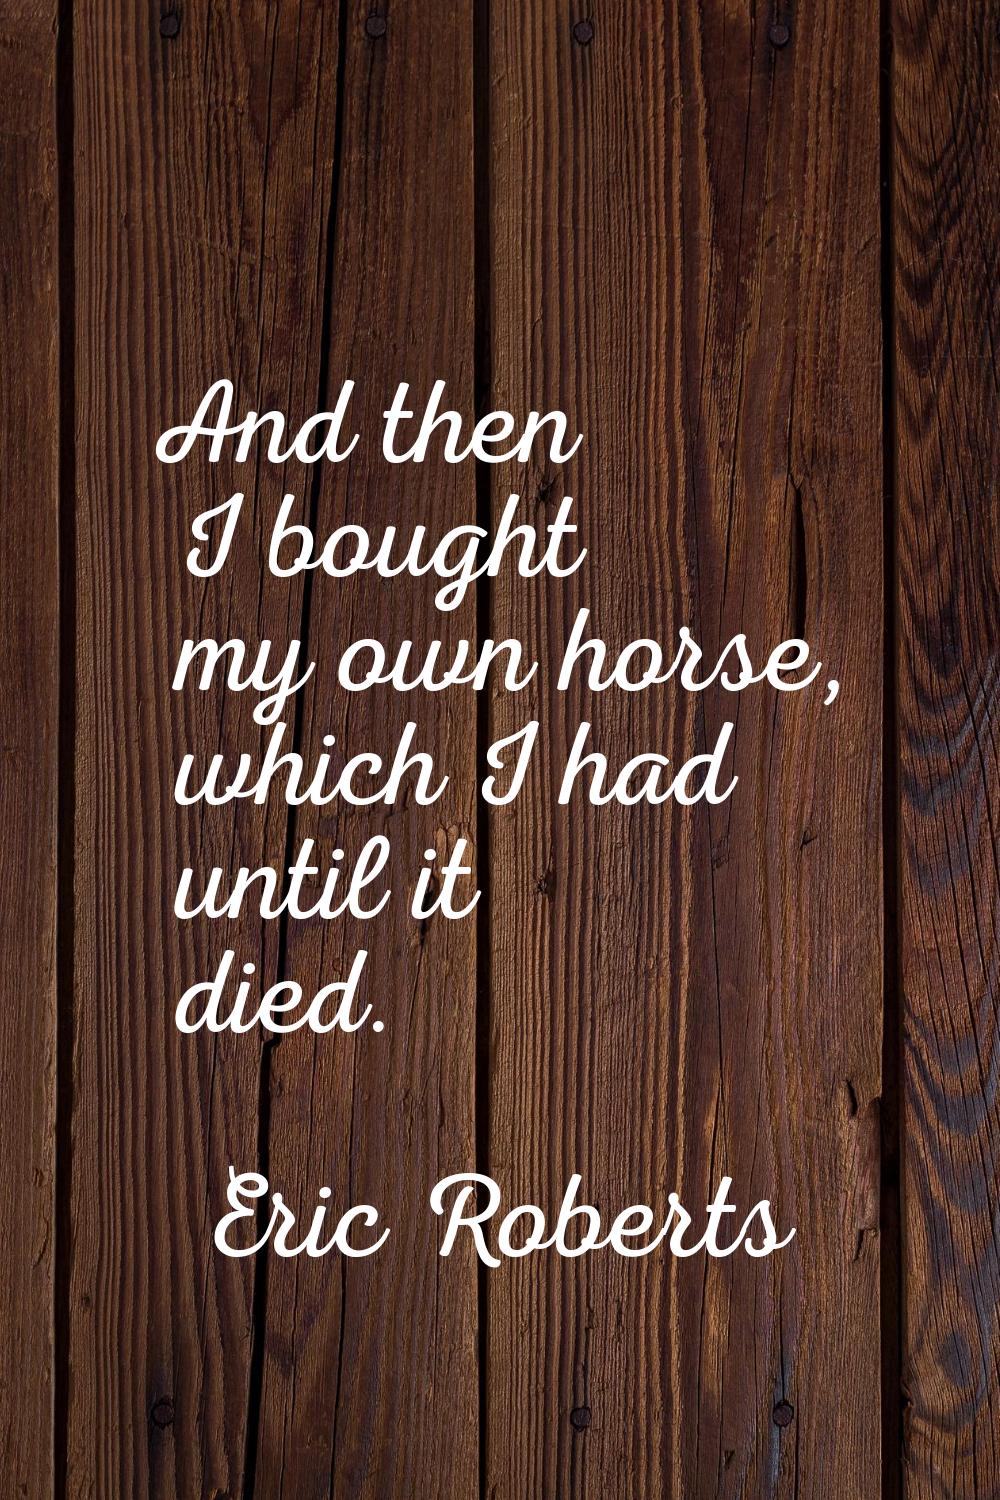 And then I bought my own horse, which I had until it died.